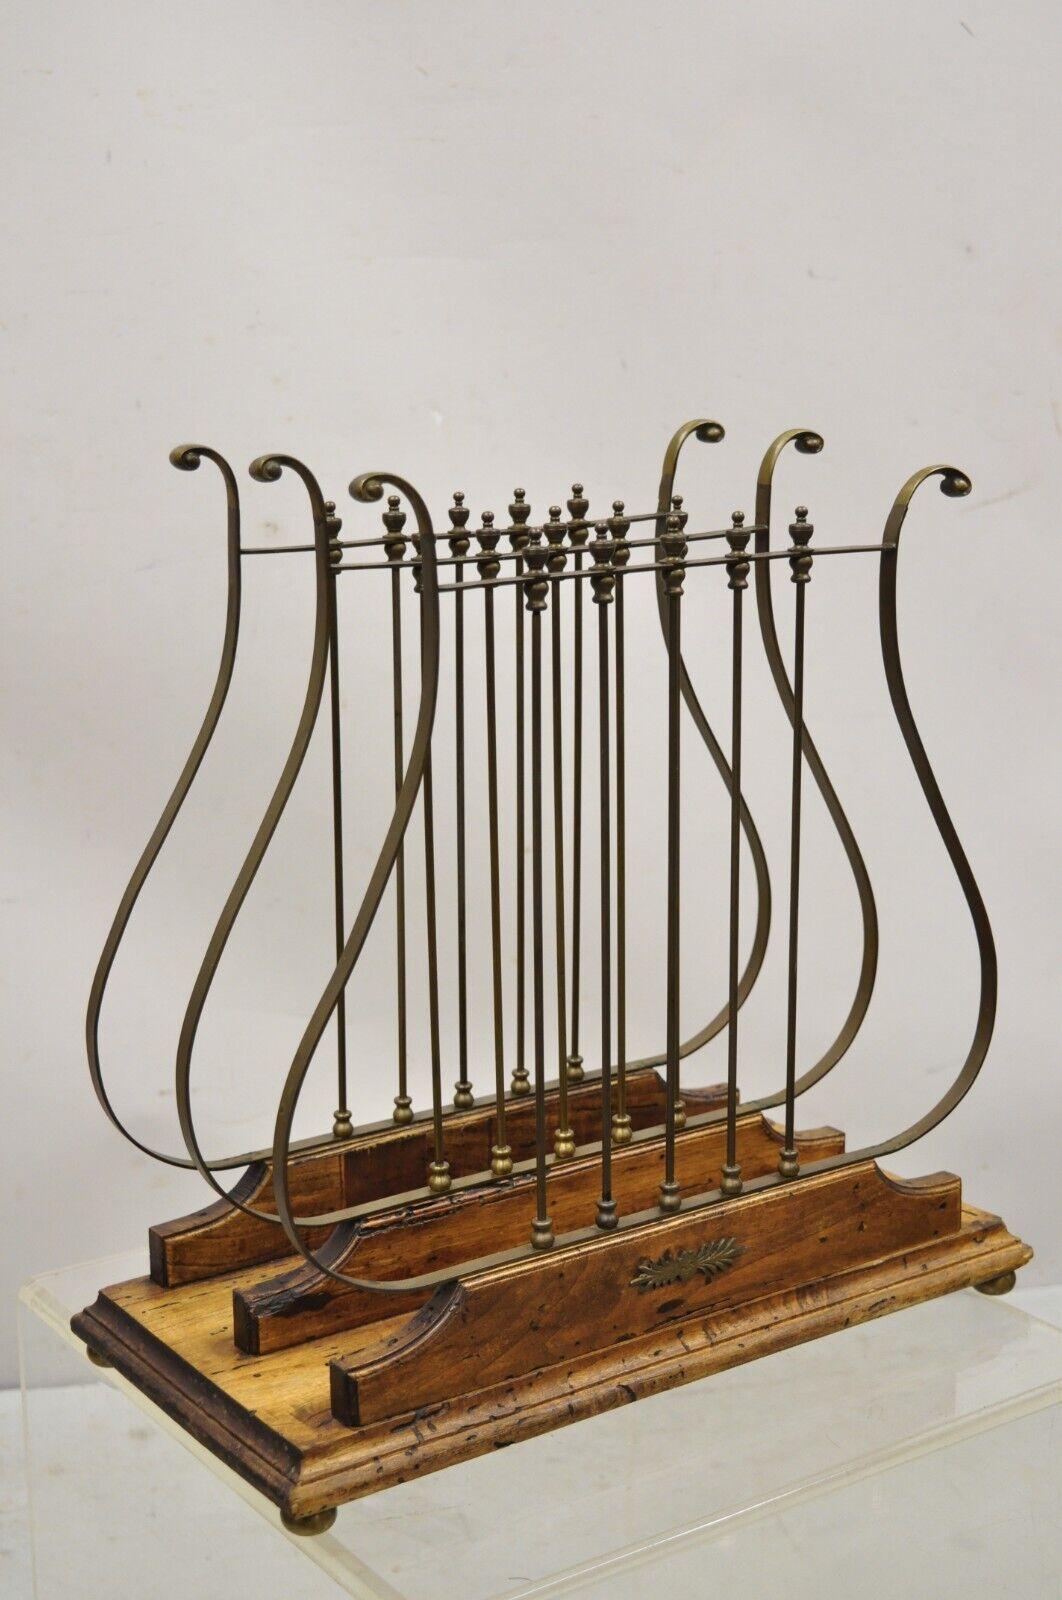 Vintage French neoclassical style Italian brass Lyre Harp magazine rack. Item features brass triple harp dividers, distressed wood base with antiqued finish, brass ball form feet, very nice vintage item, stamped 